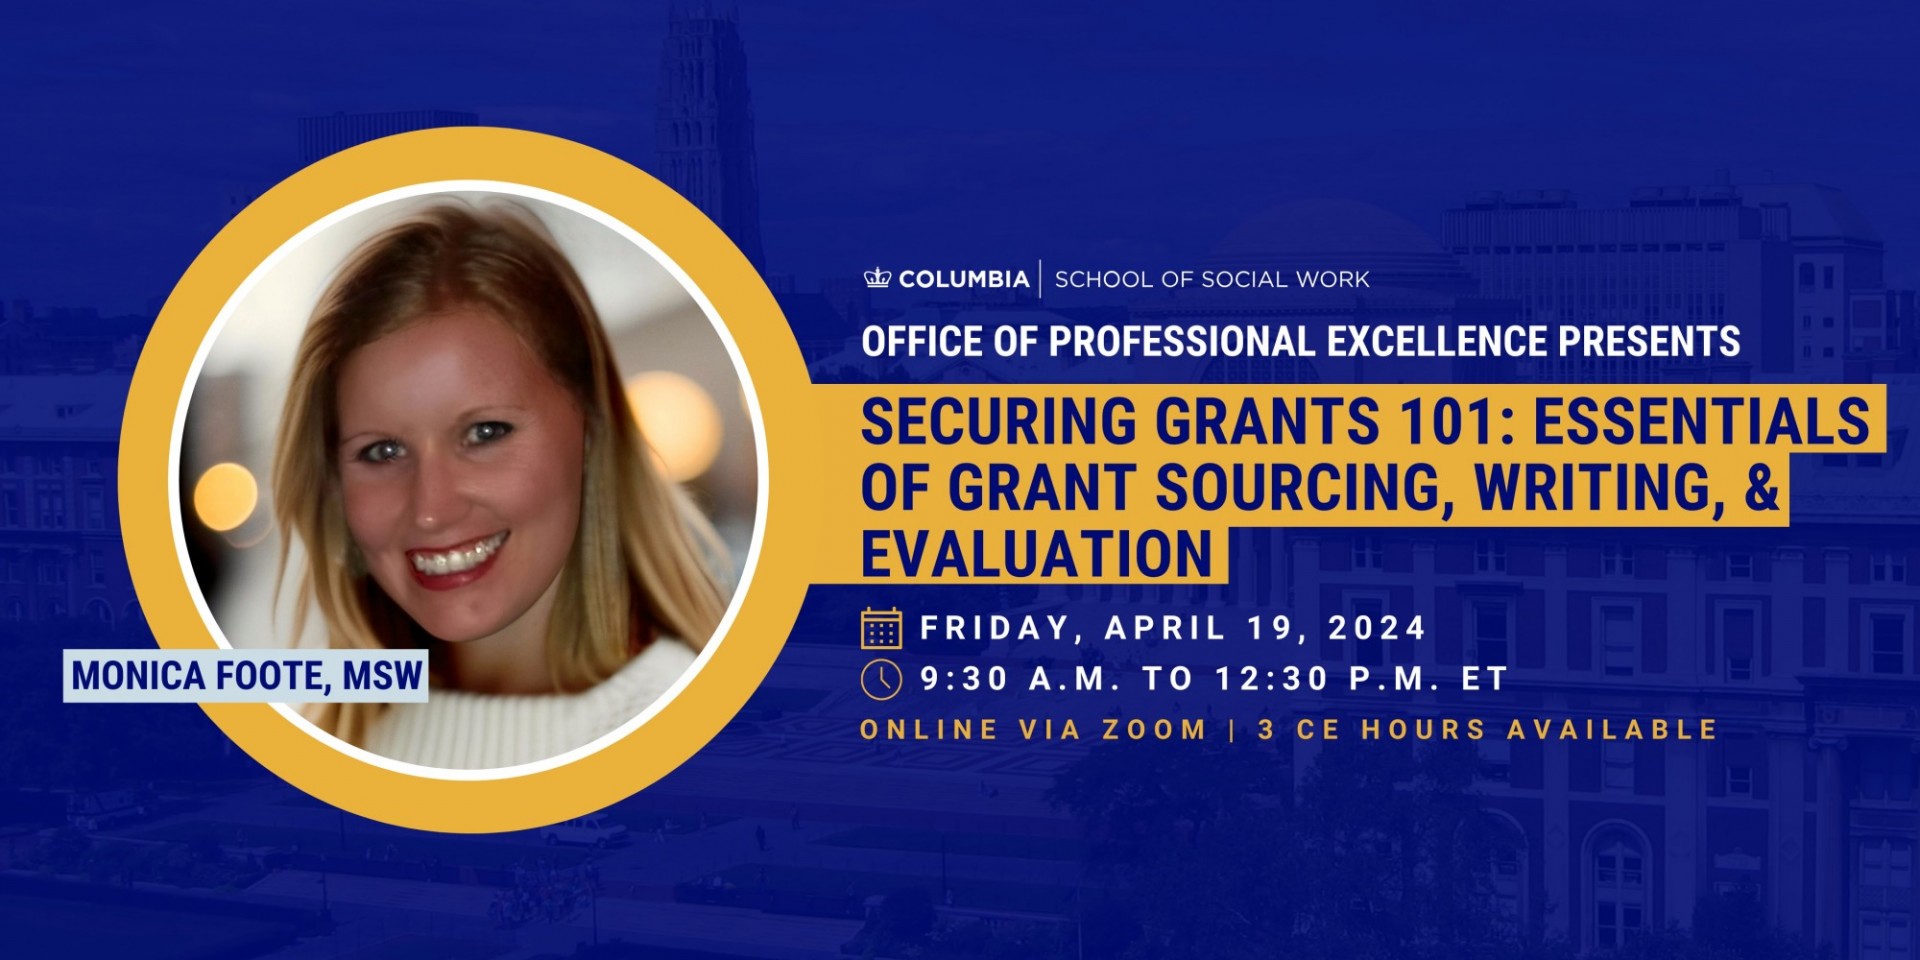 Securing Grants 101: Essentials of Grant Sourcing, Writing, & Evaluation